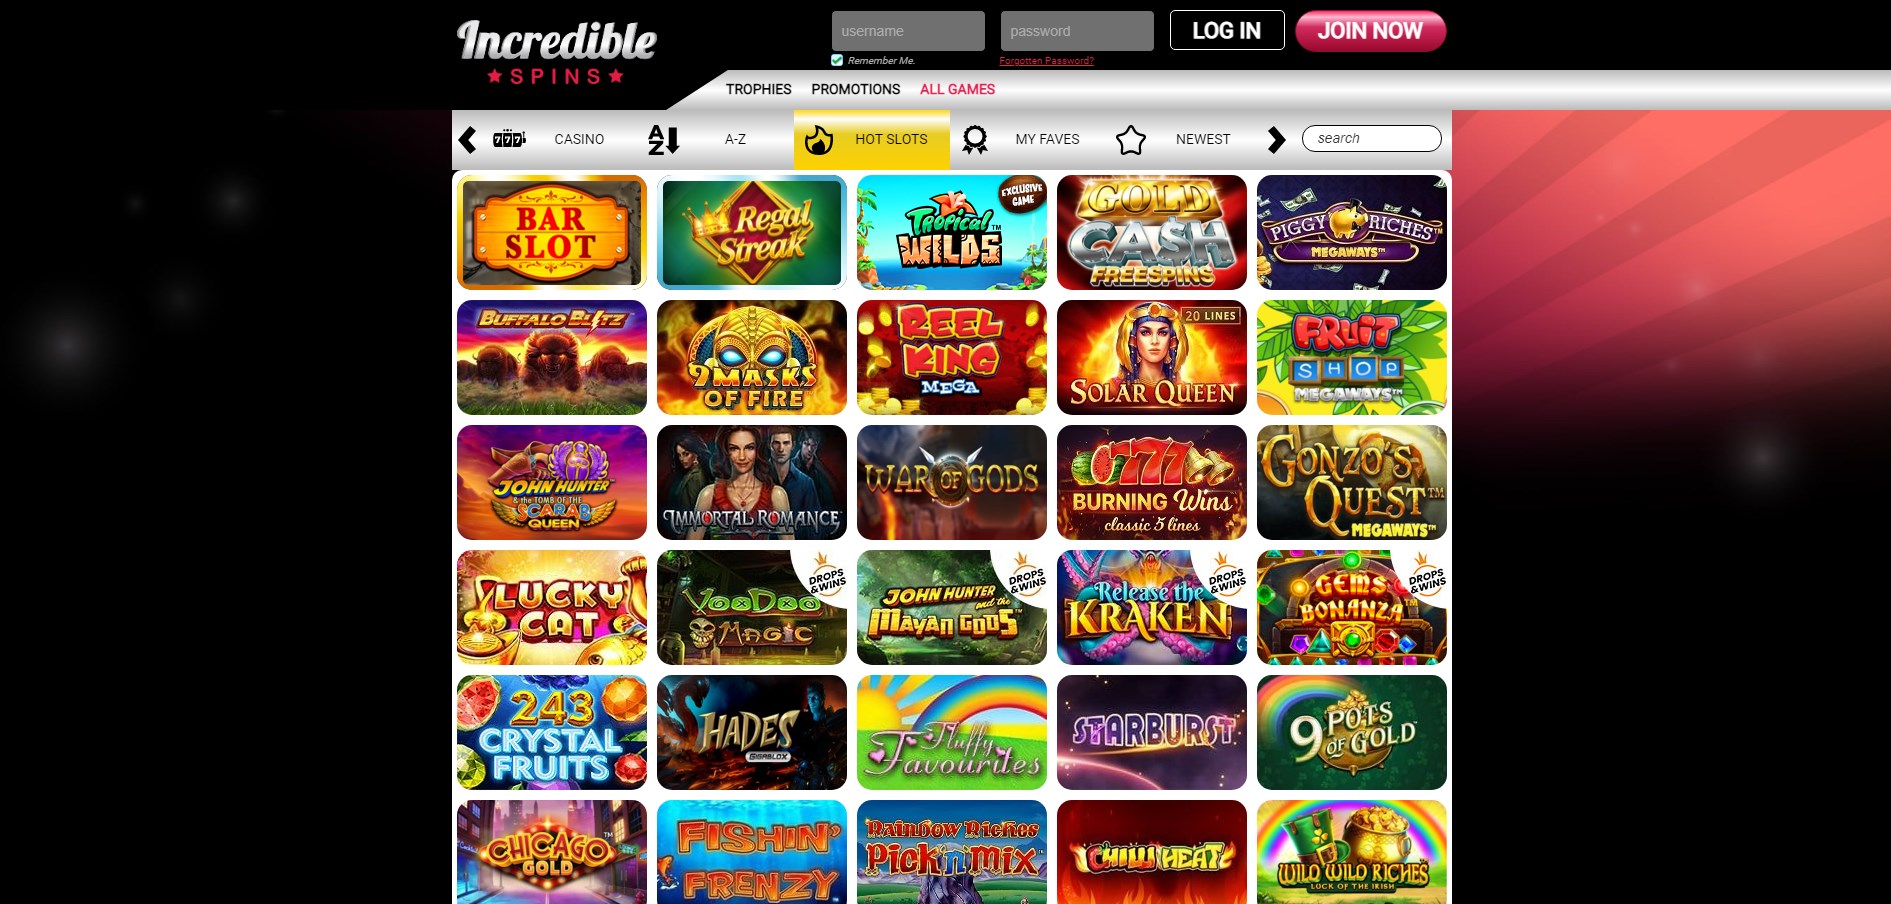 Incredible Spins Casino Games